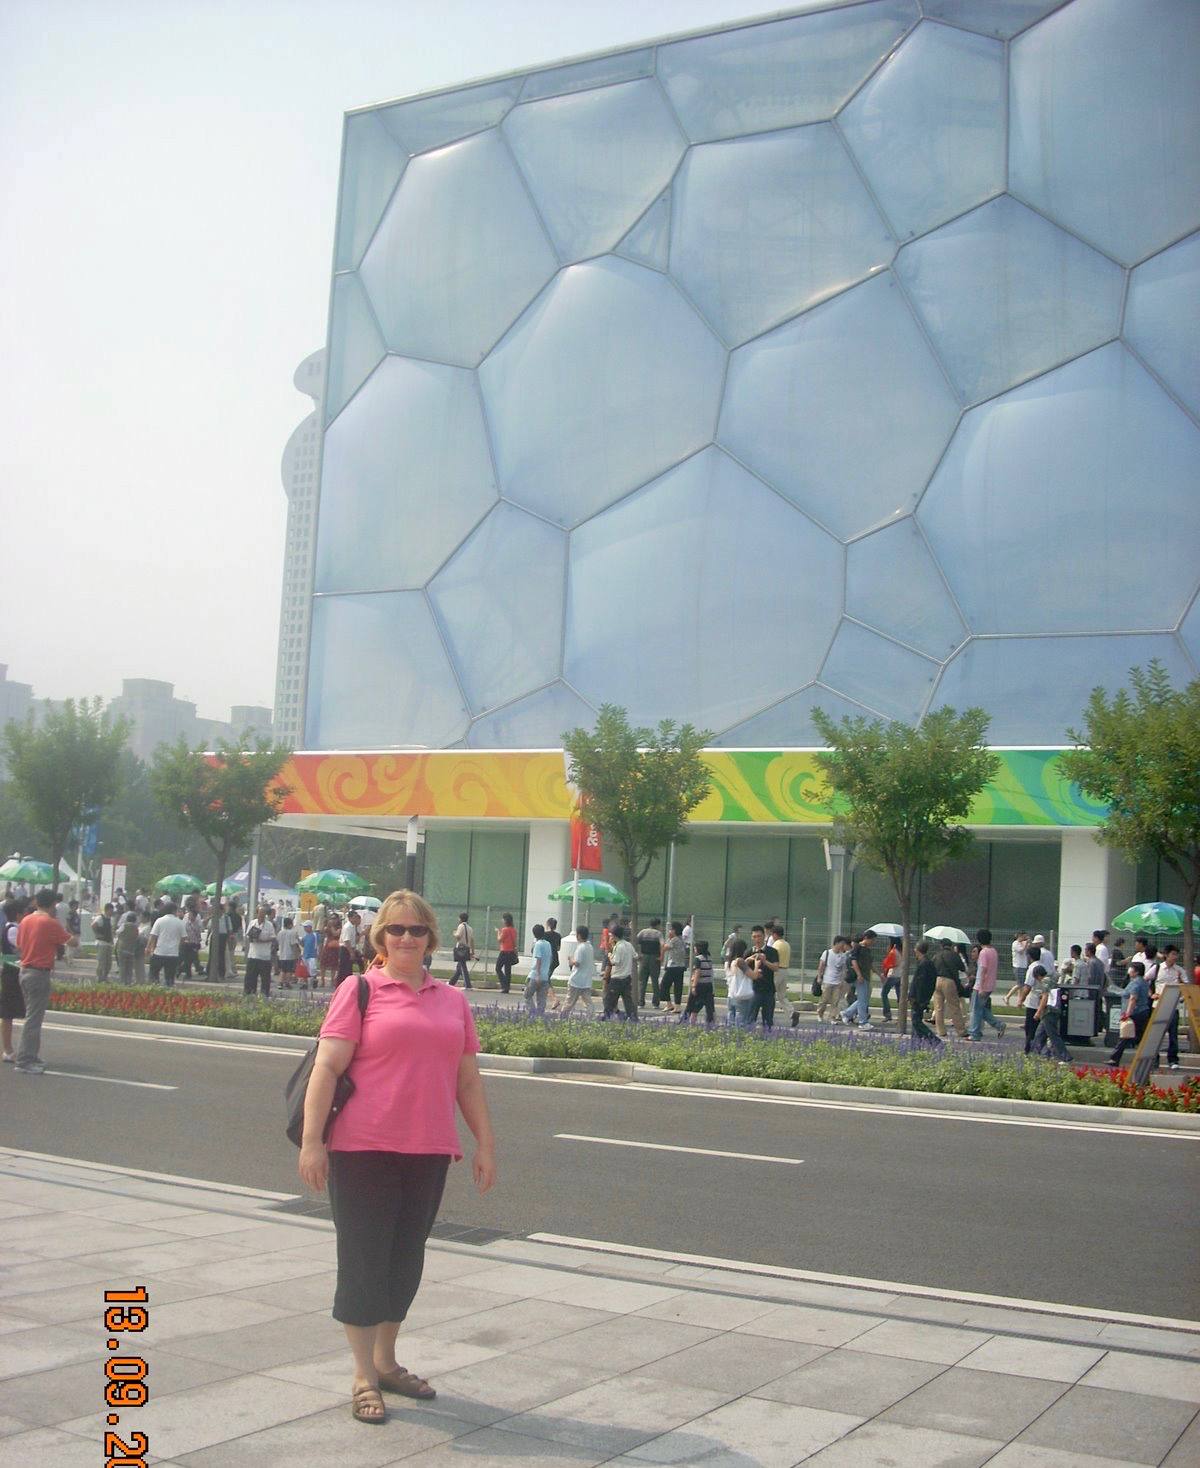 Lesley outside the Water Cube.